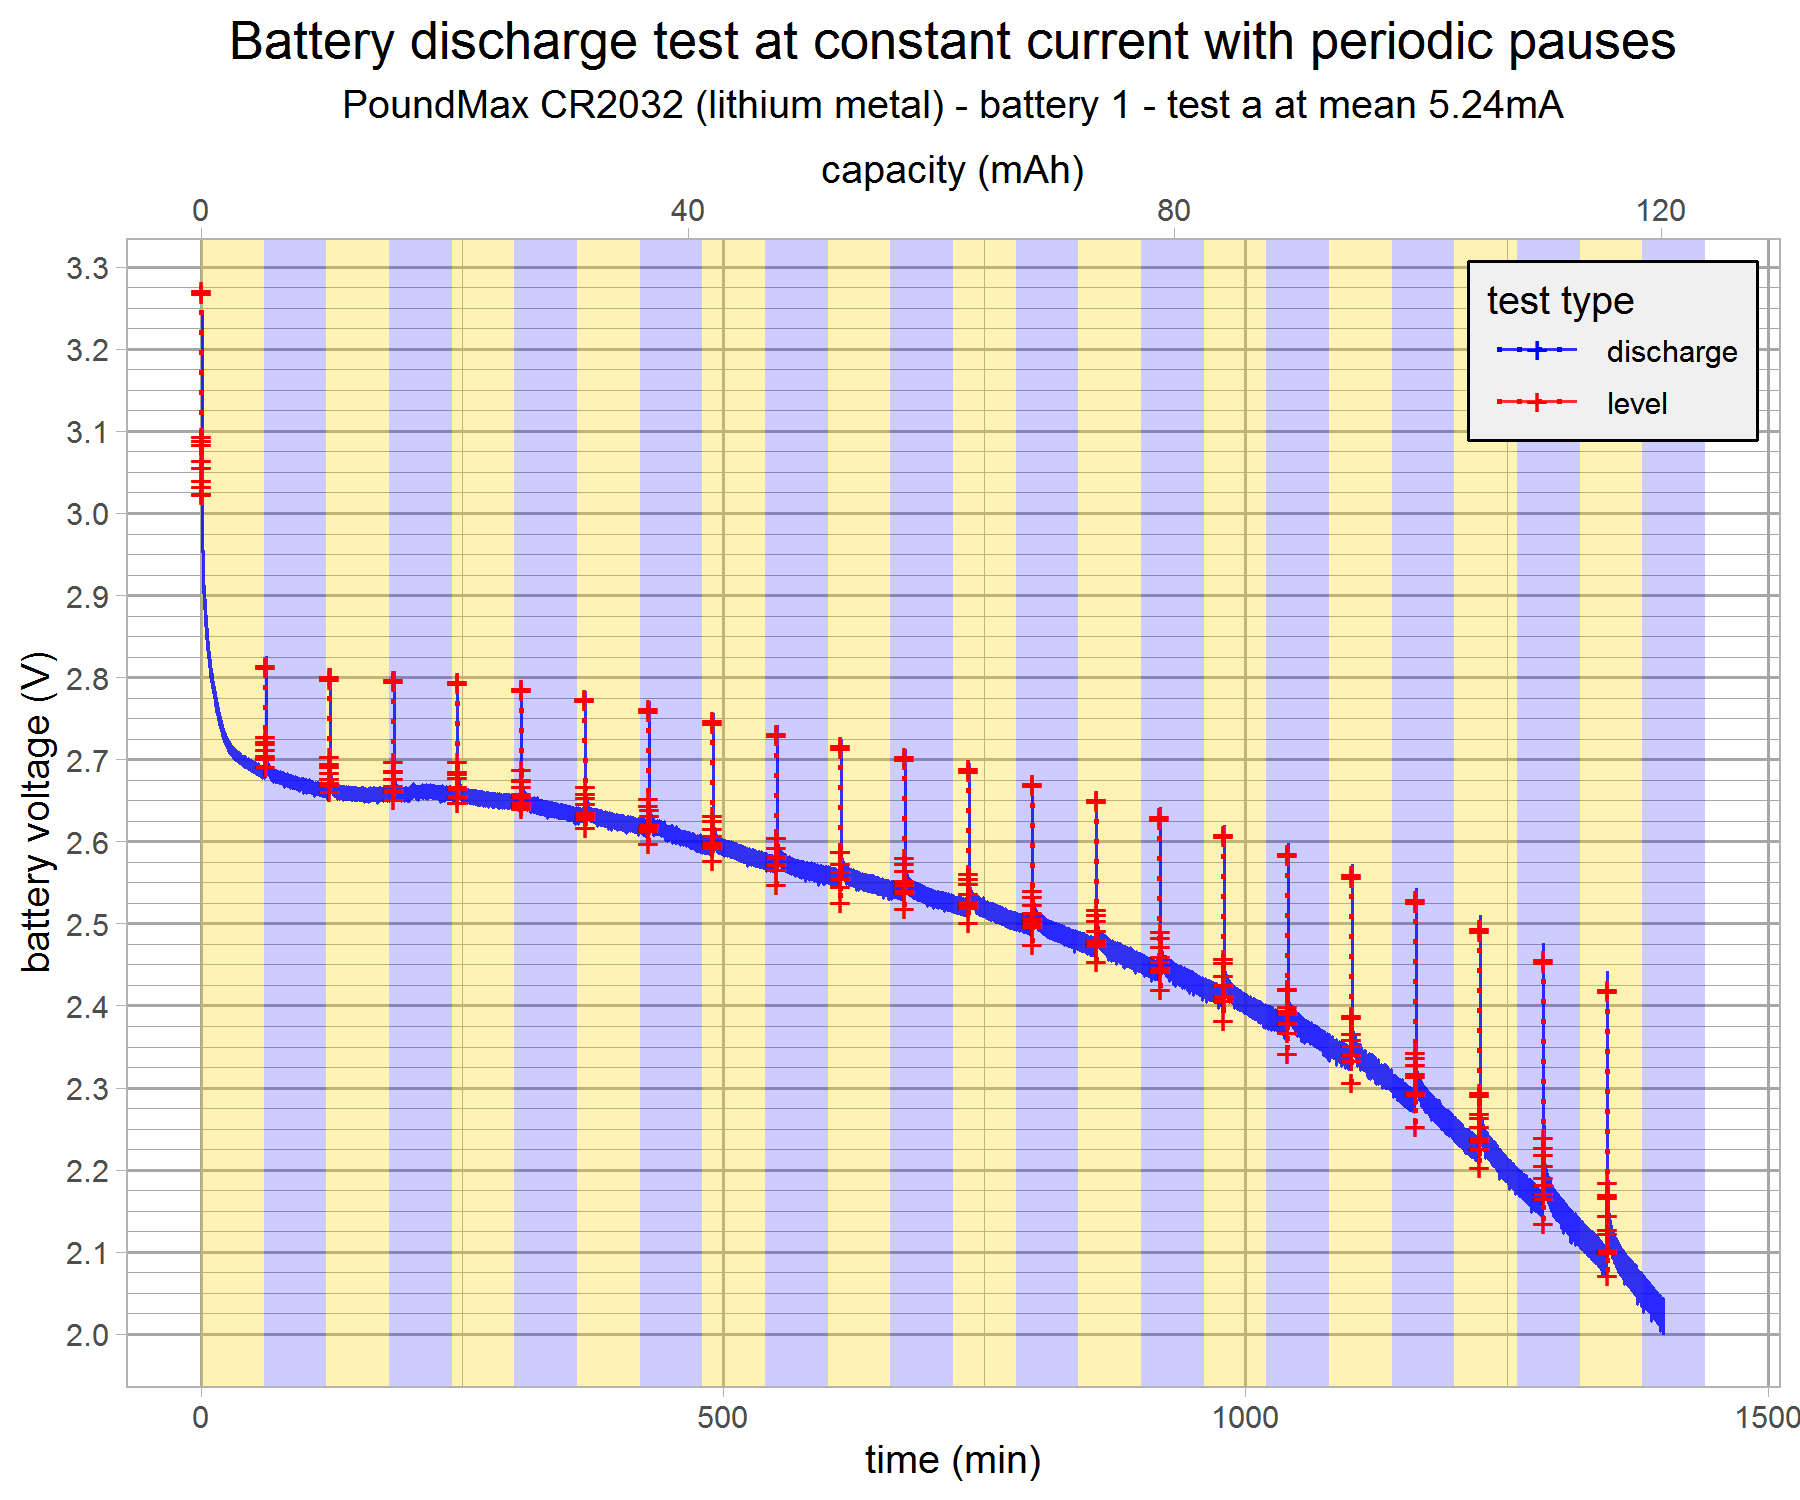 battery-discharge-test-poundmax1-1a-v7-g1.png